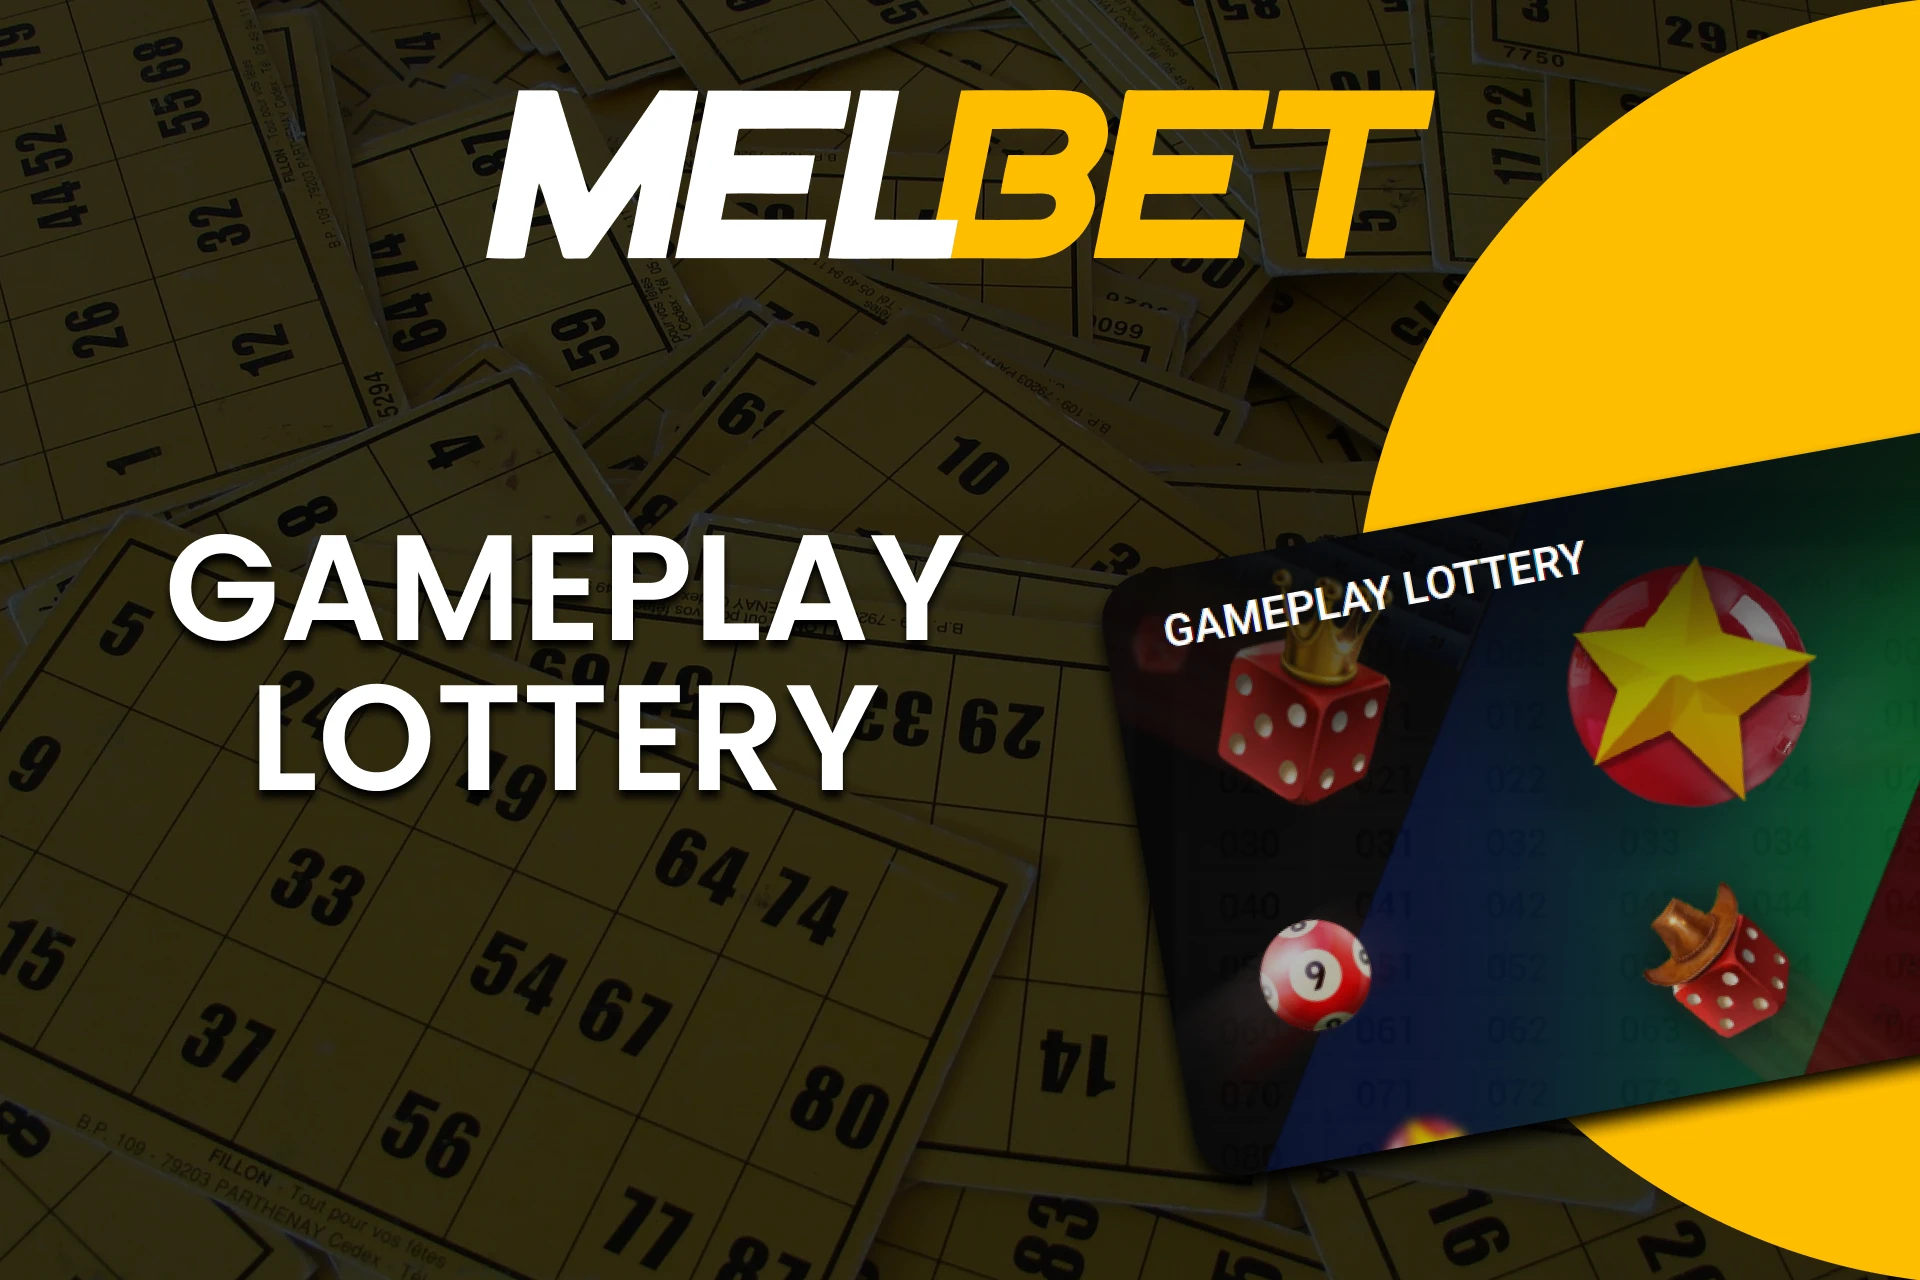 To play Bingo, choose Gameplay Lottery from Melbet.